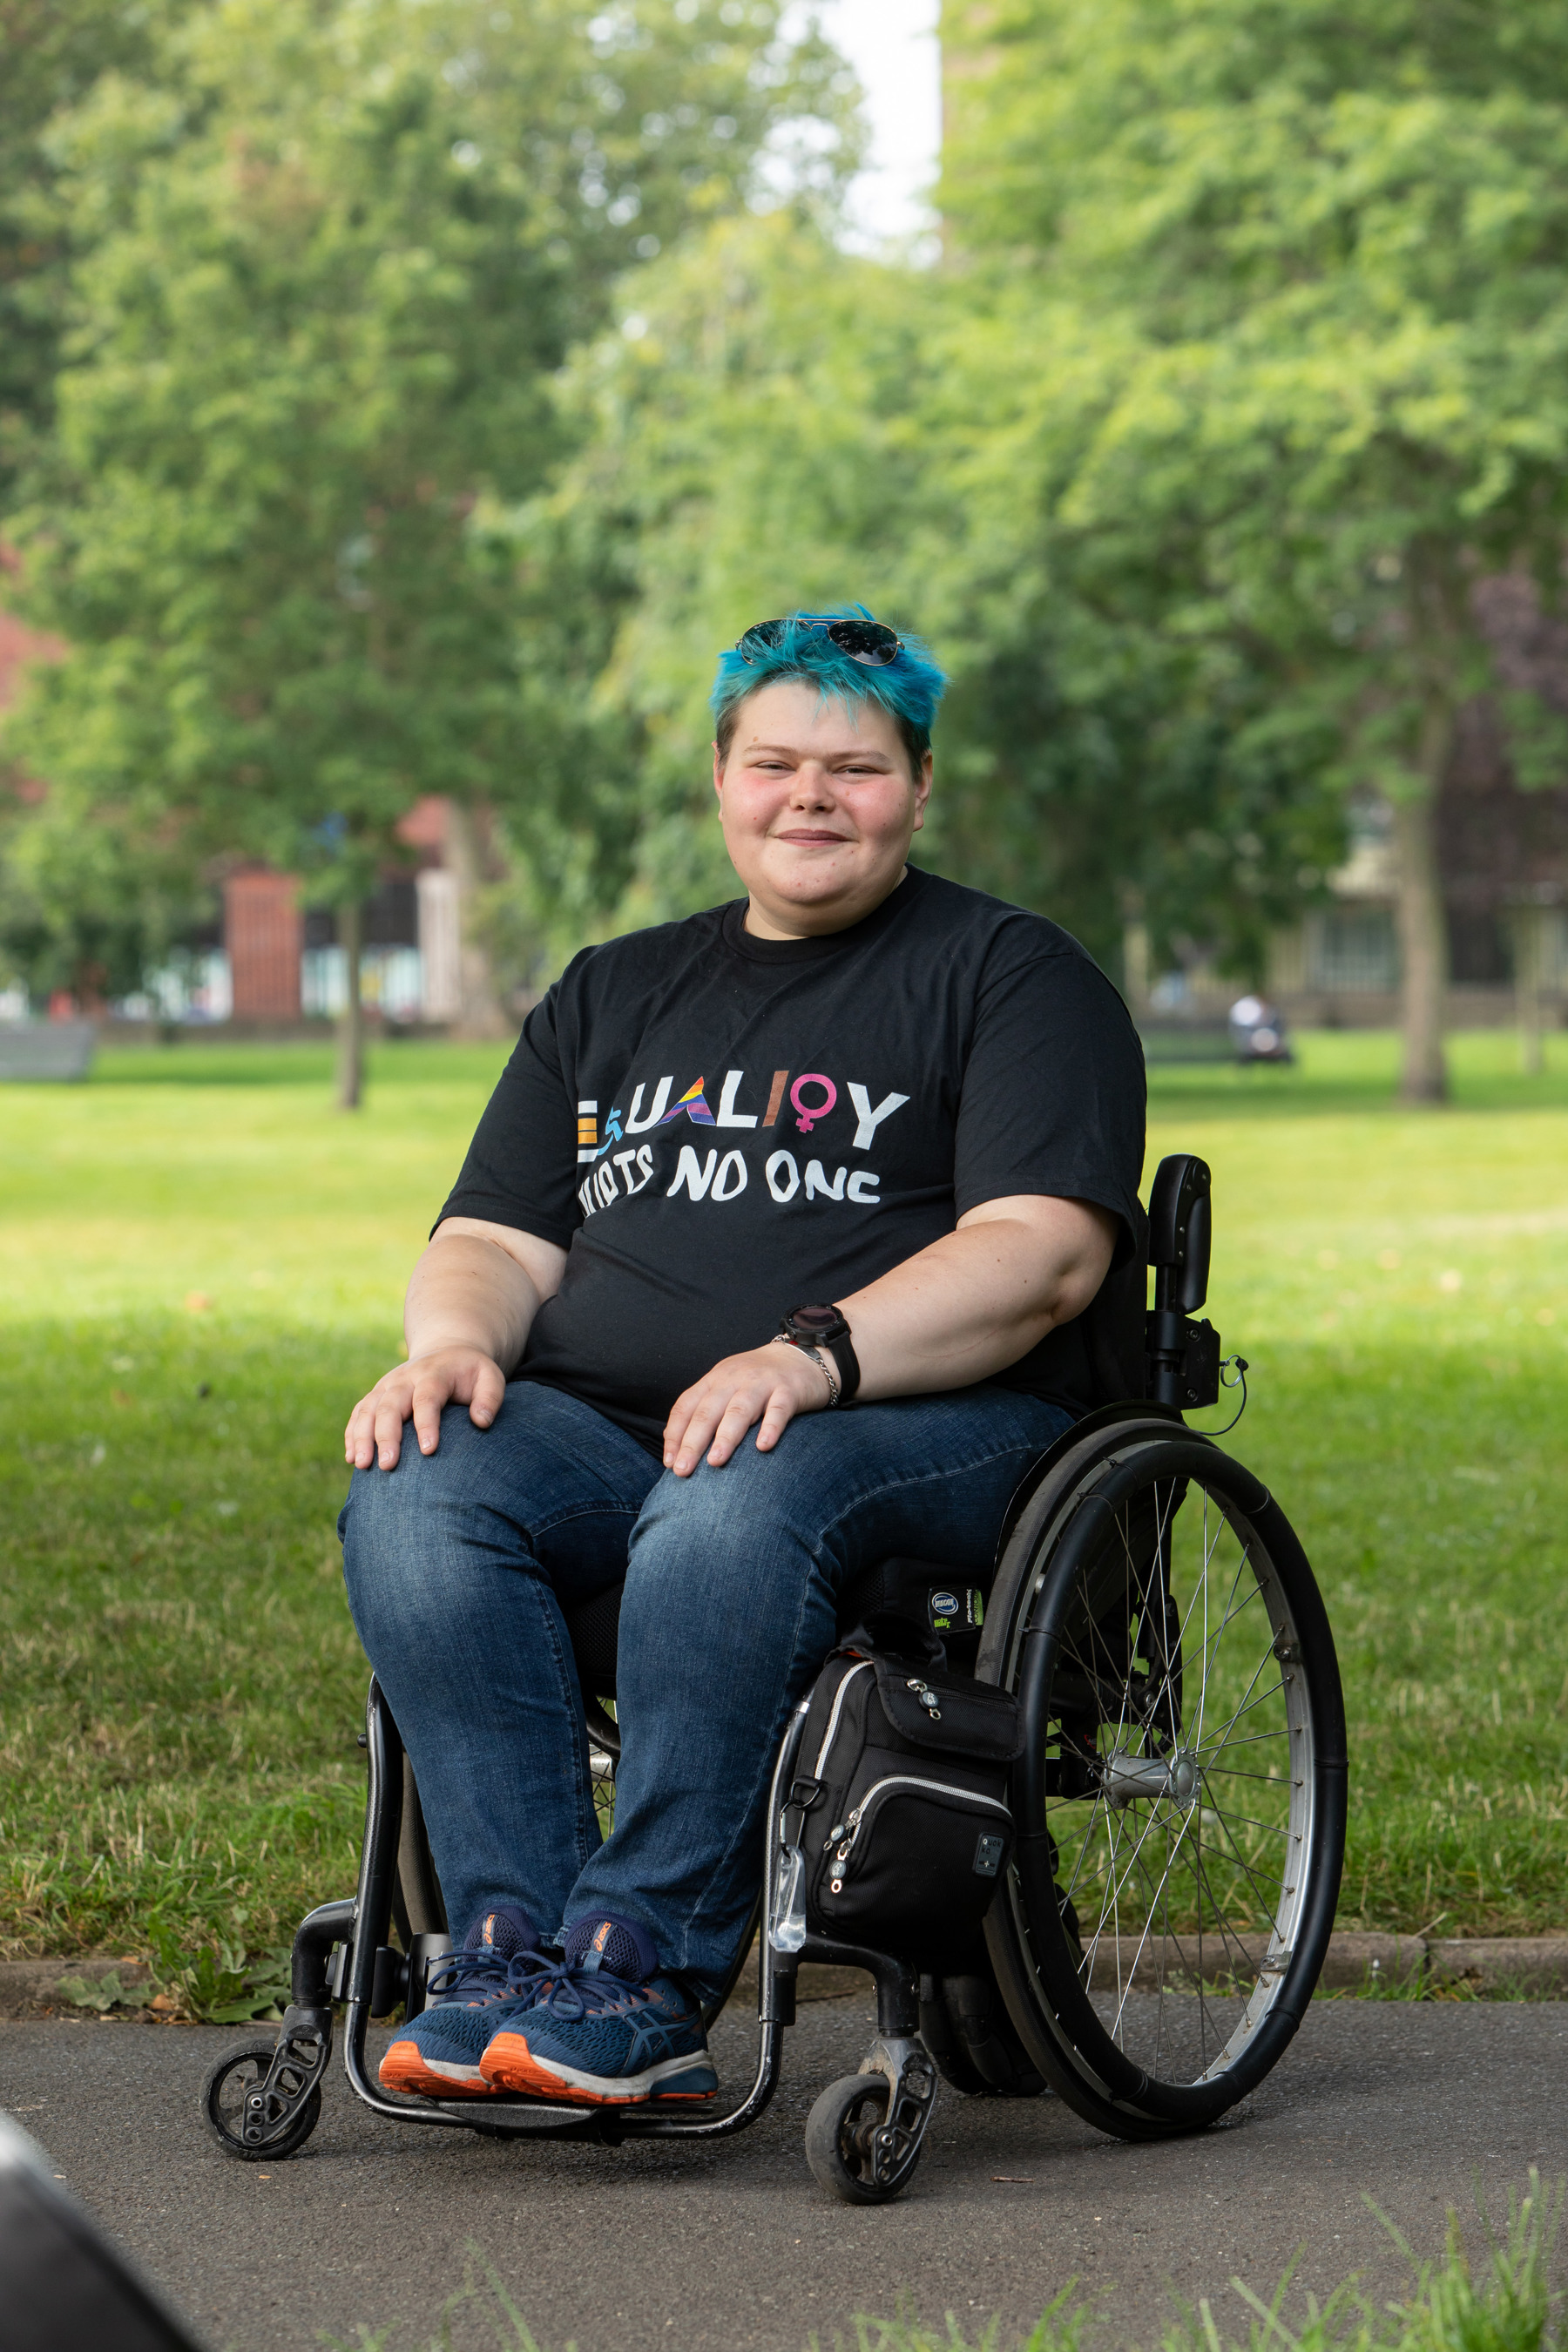 Eddie sitting in wheelchair smiling wearing Equality Hurts No One t-shirt, jeans and trainers with grass and trees behind